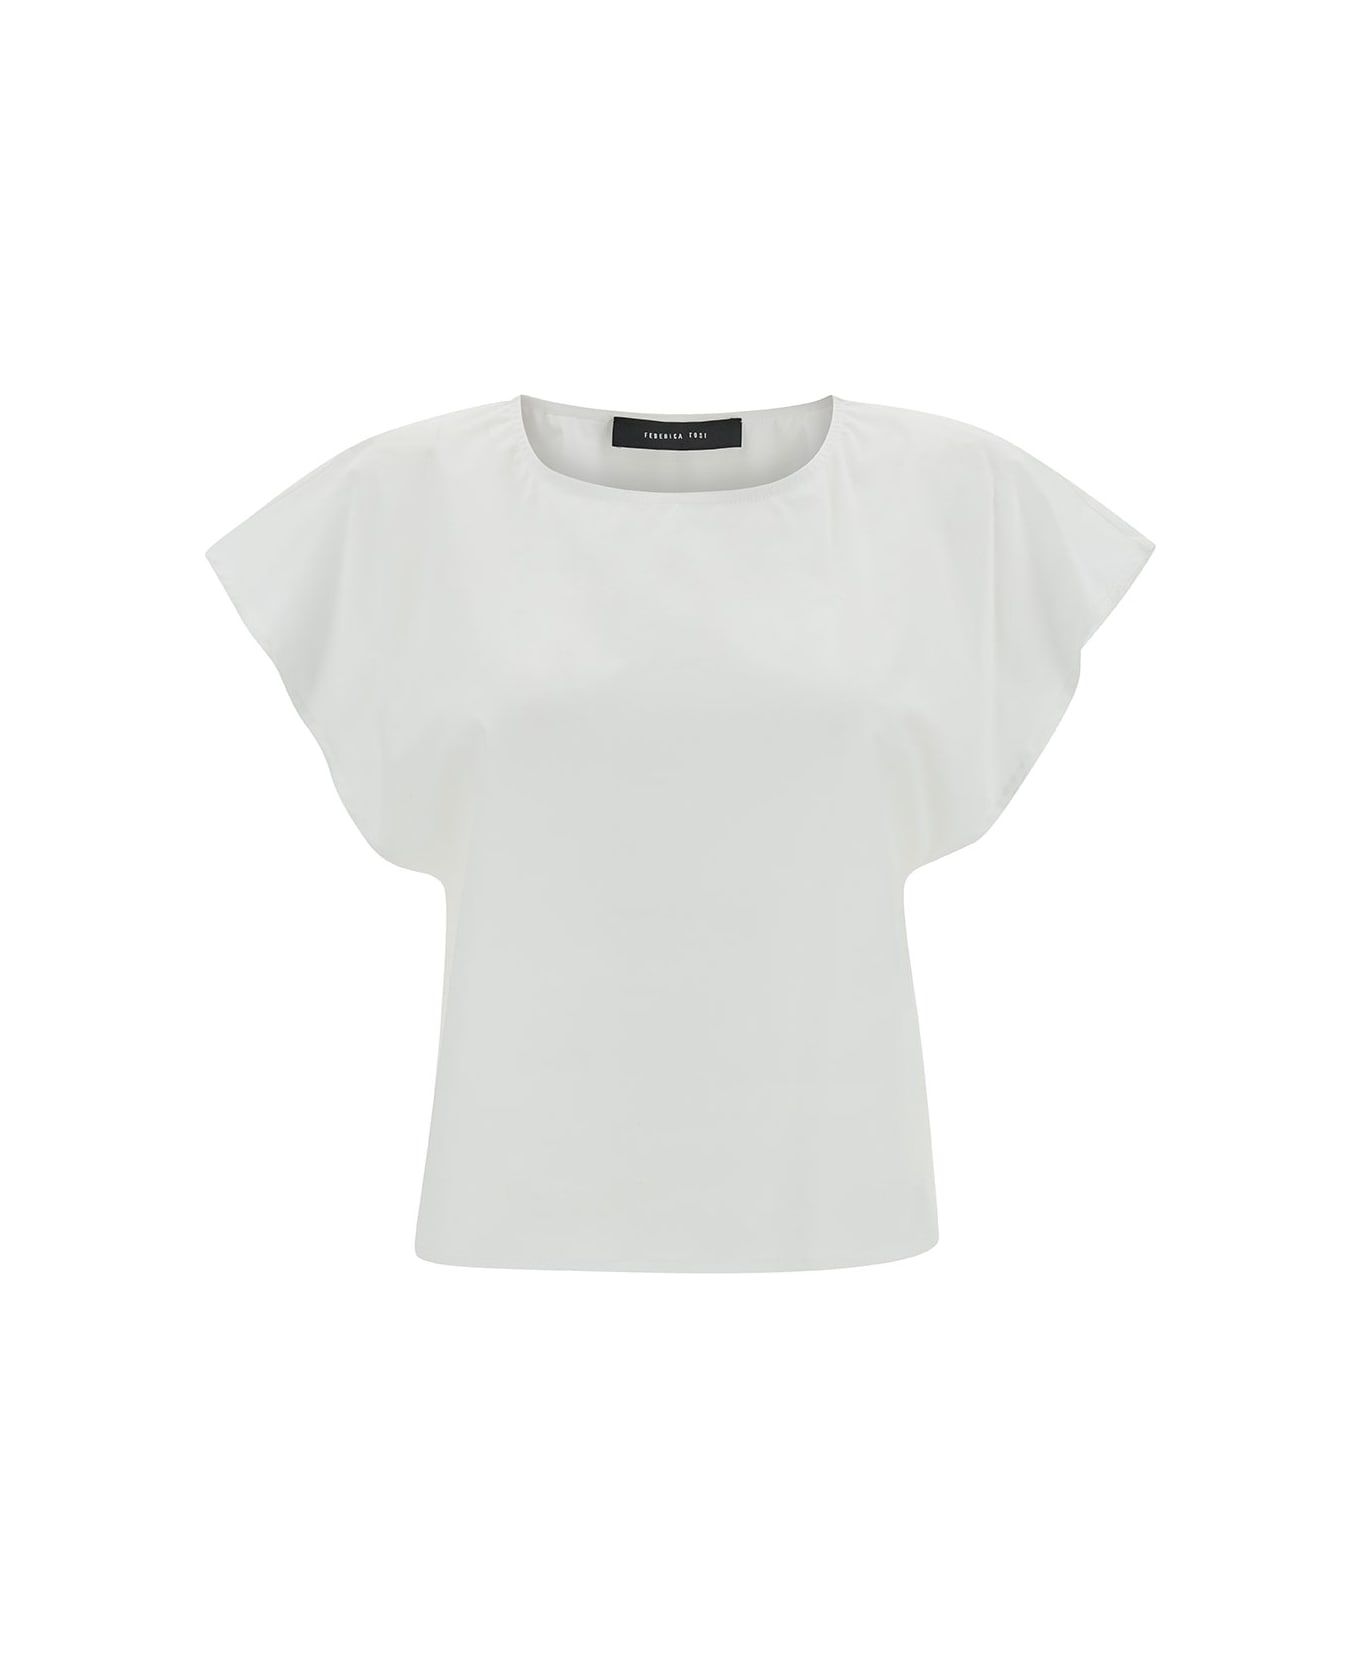 Federica Tosi White Top With Cap Sleeves In Stretch Cotton Woman - White